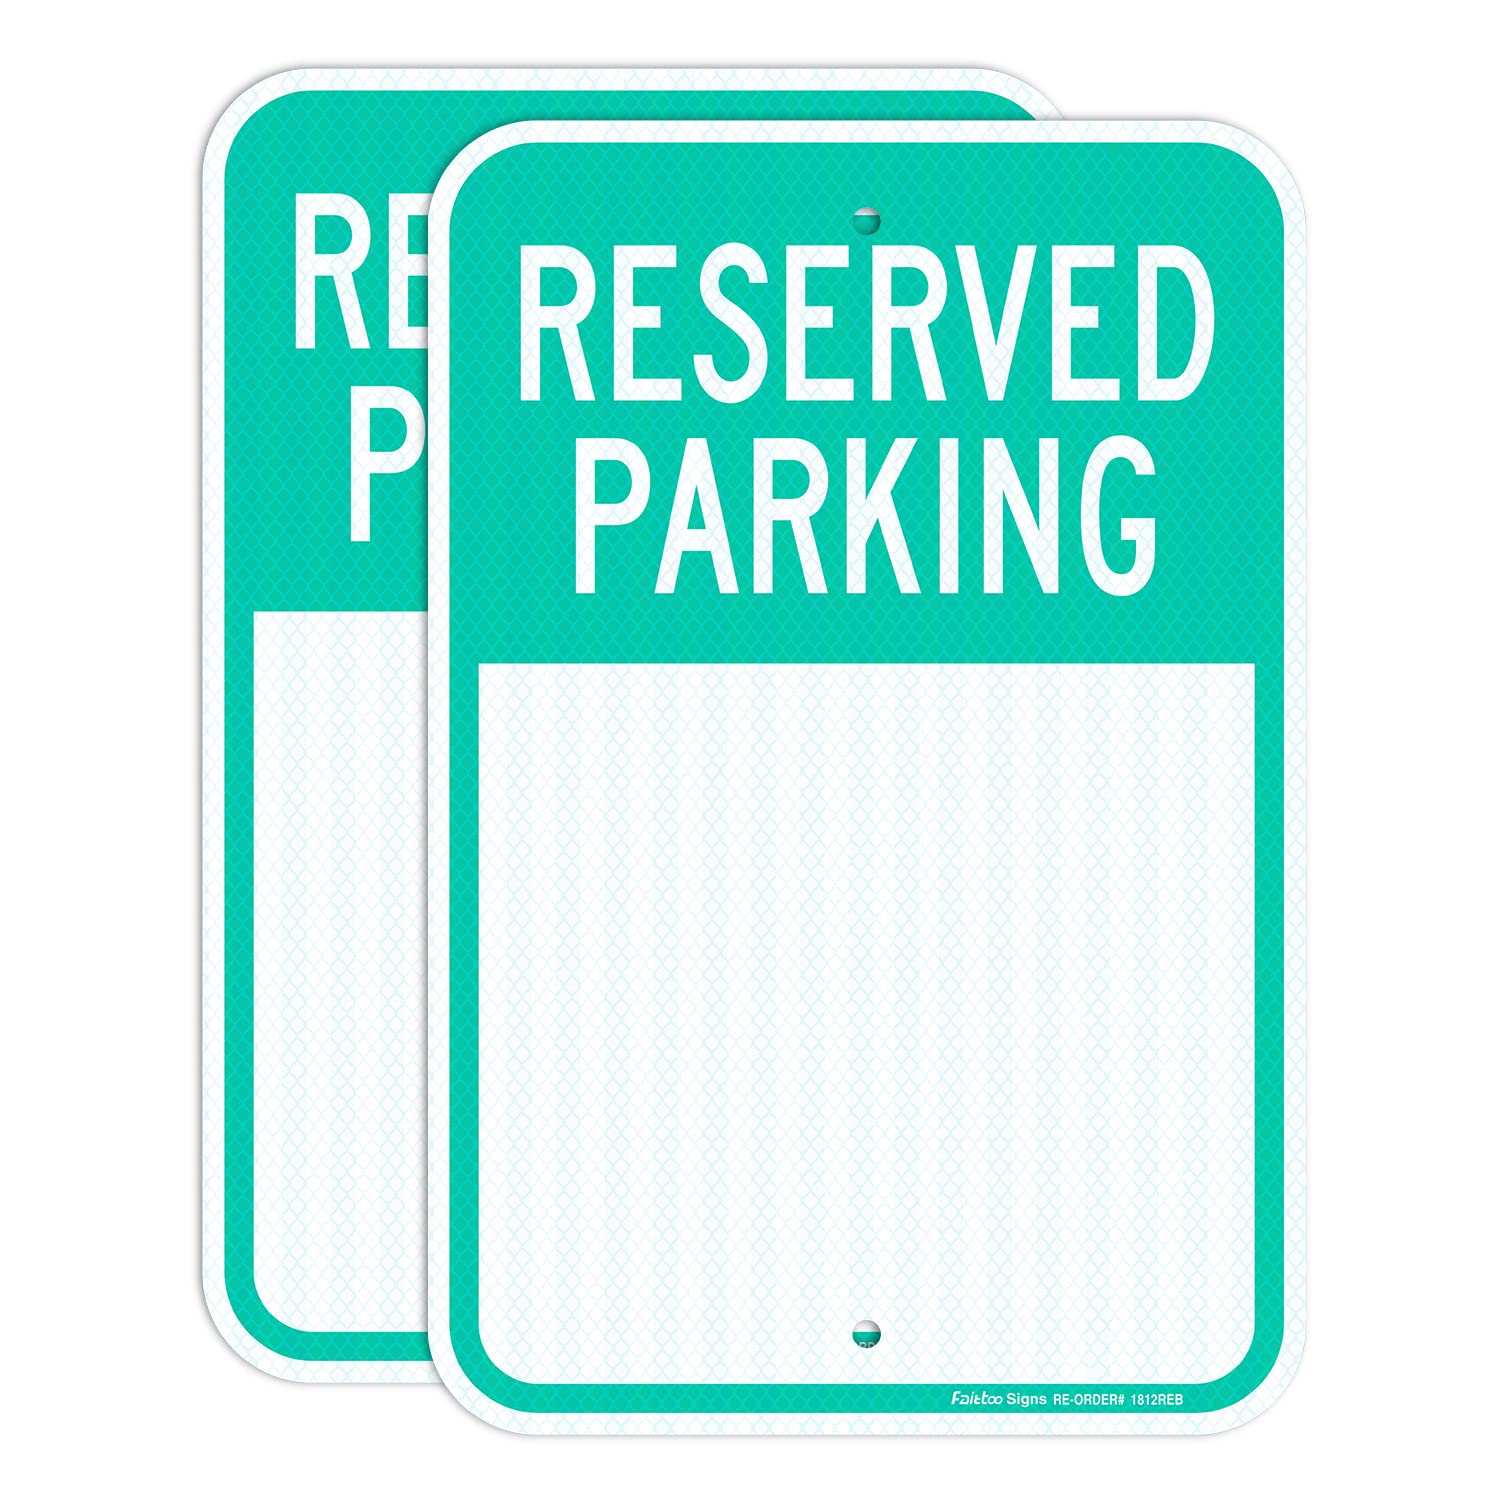 Faittoo Blank Reserved Parking Sign,18 x 12 Inch Engineer Grade Reflective Aluminum, Weather/Fade Resistant, UV Protected, Easy to Install and Read, Indoor/Outdoors Use